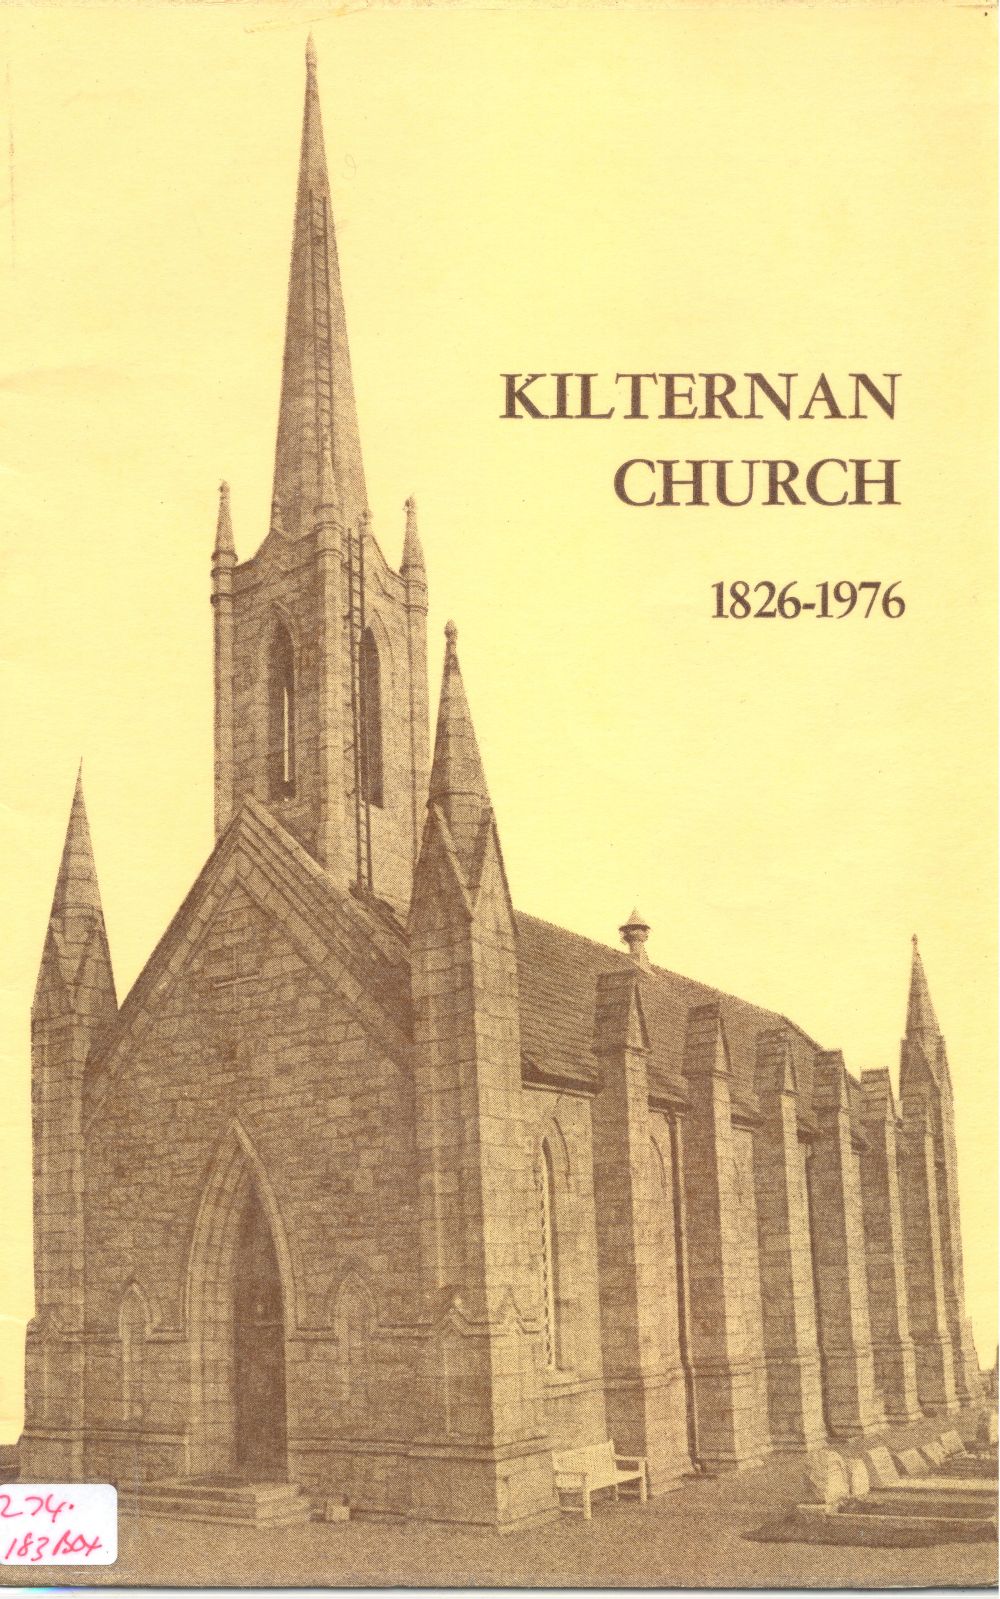 Printed parish histories available in the RCB Library collections